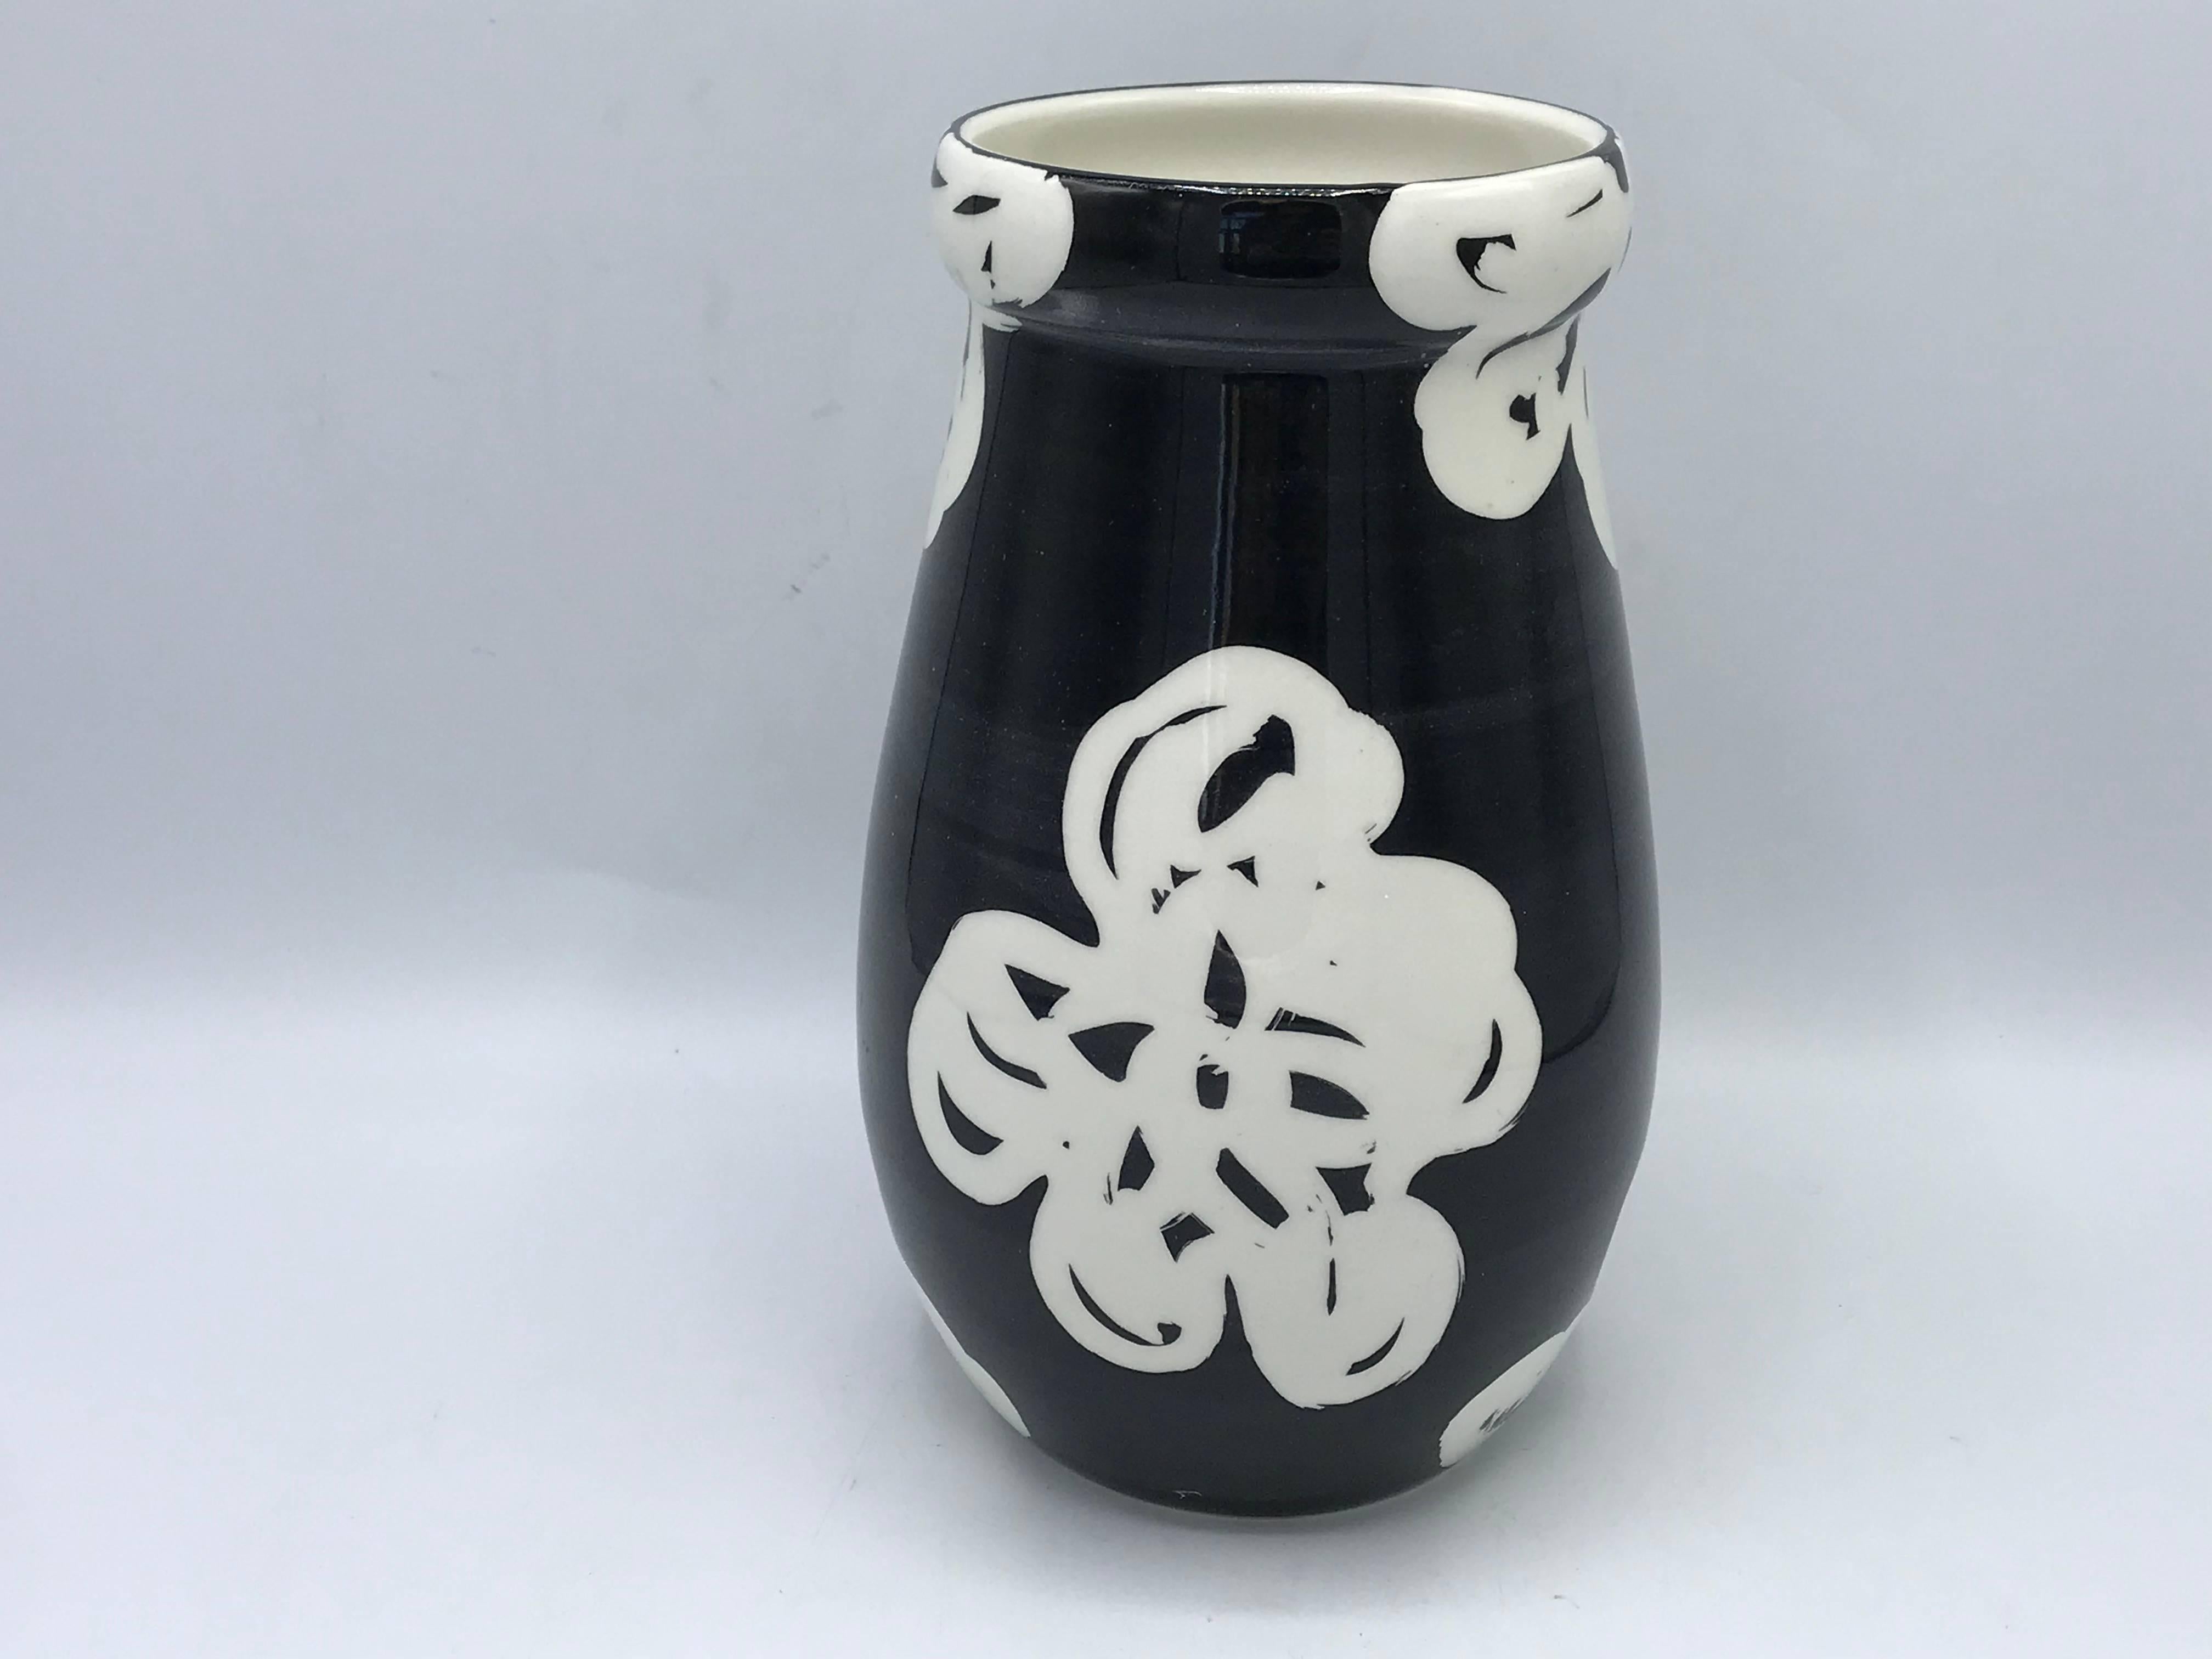 Italian 1970s Bitossi Vase with Modern Black and White Floral Motif